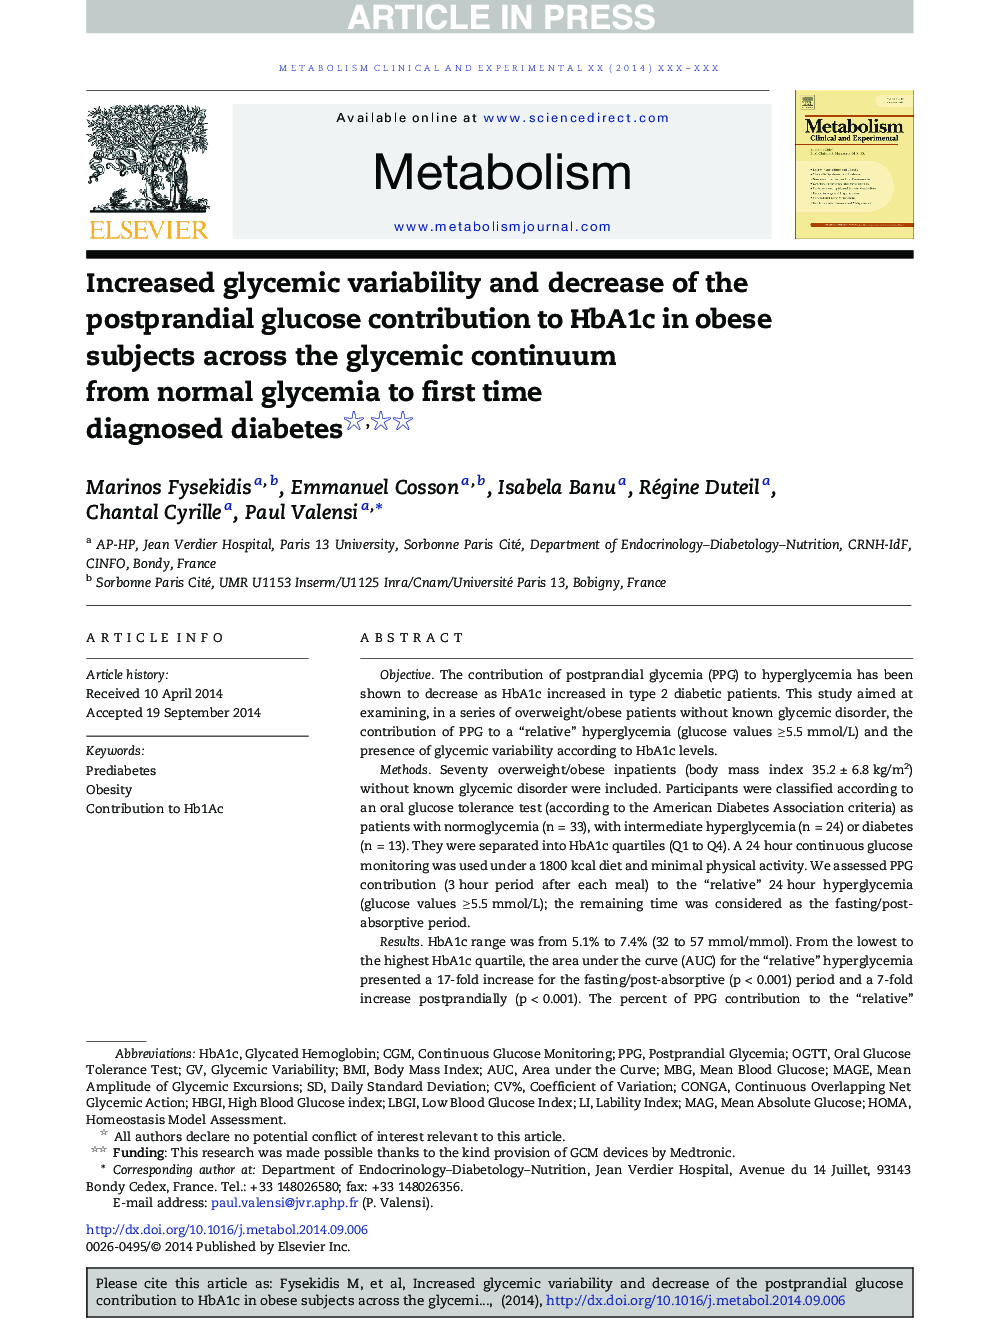 Increased glycemic variability and decrease of the postprandial glucose contribution to HbA1c in obese subjects across the glycemic continuum from normal glycemia to first time diagnosed diabetes